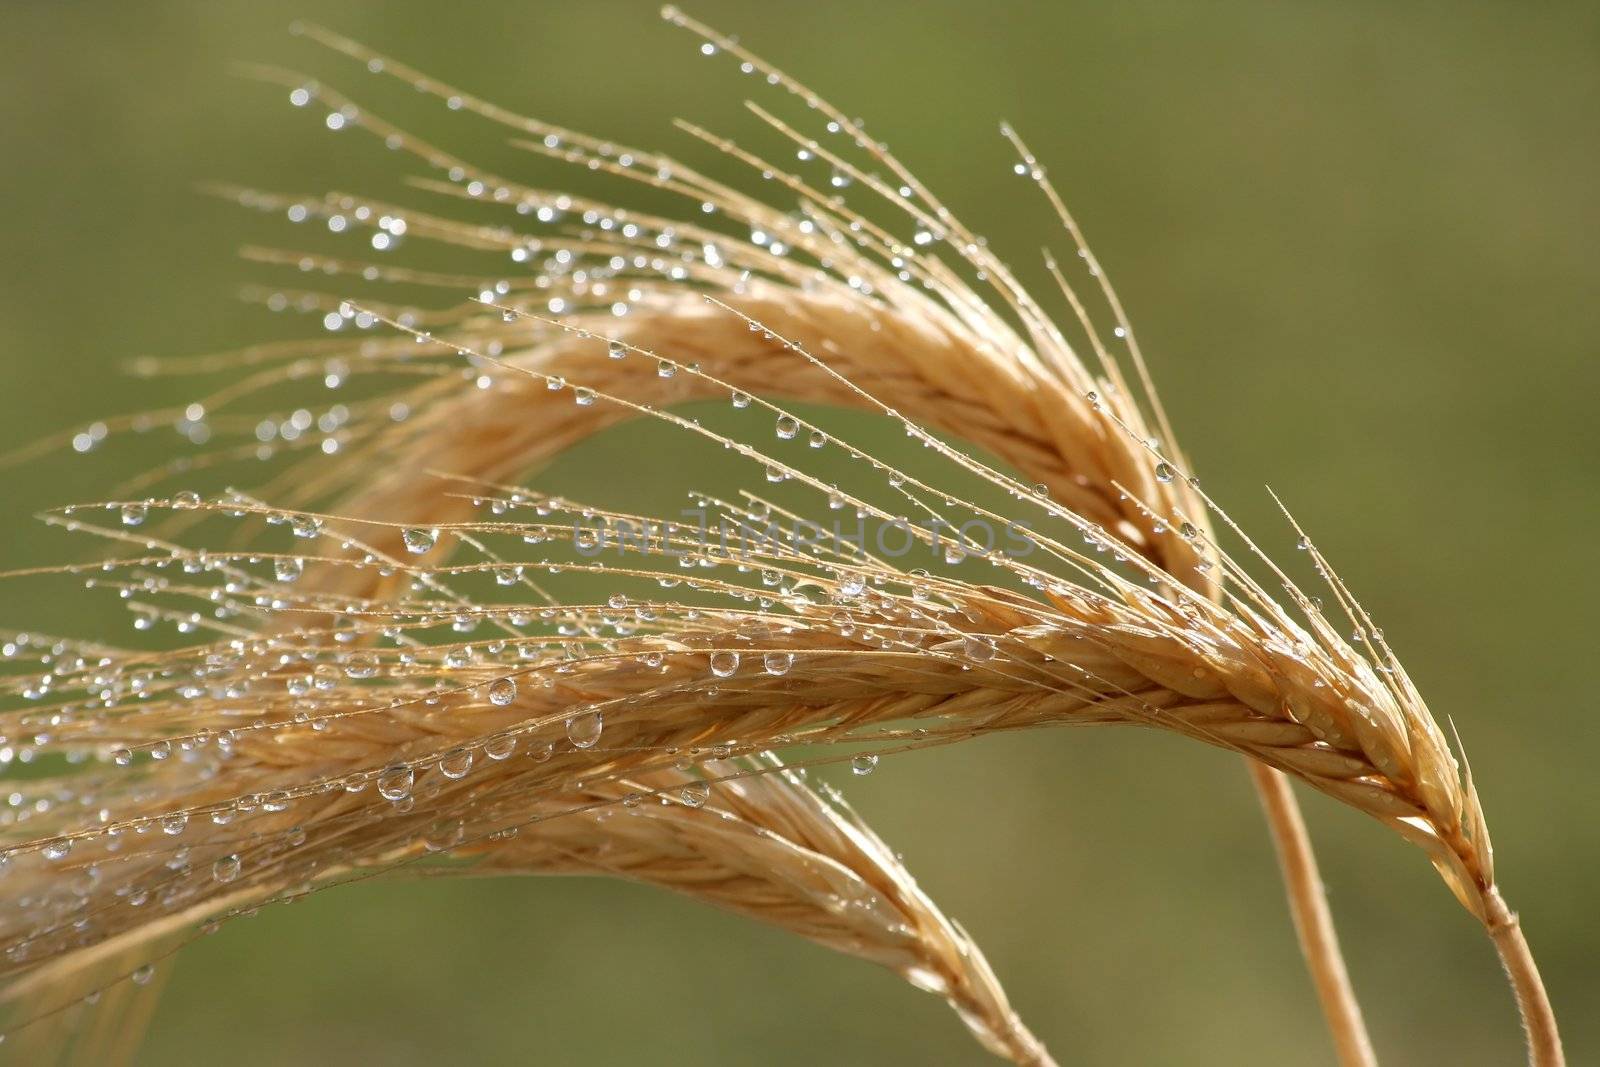 Wheat ears with water drops after a rain shower